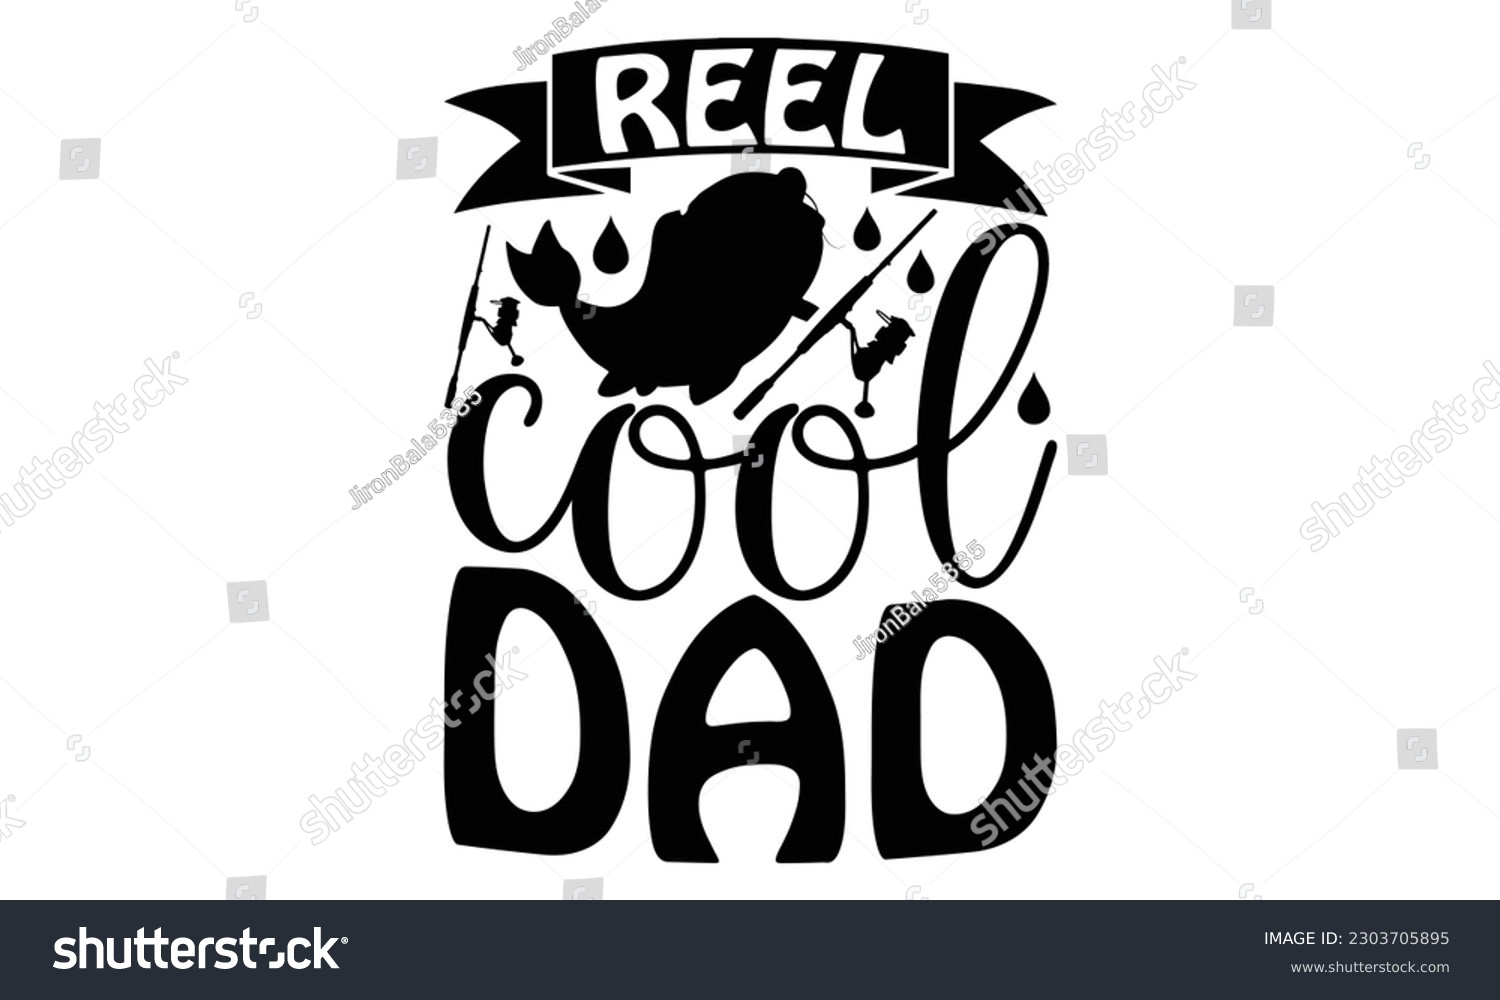 SVG of Reel Cool Dad - Fishing SVG Design, Calligraphy graphic design, this illustration can be used as a print on t-shirts, bags, stationary or as a poster.
 svg